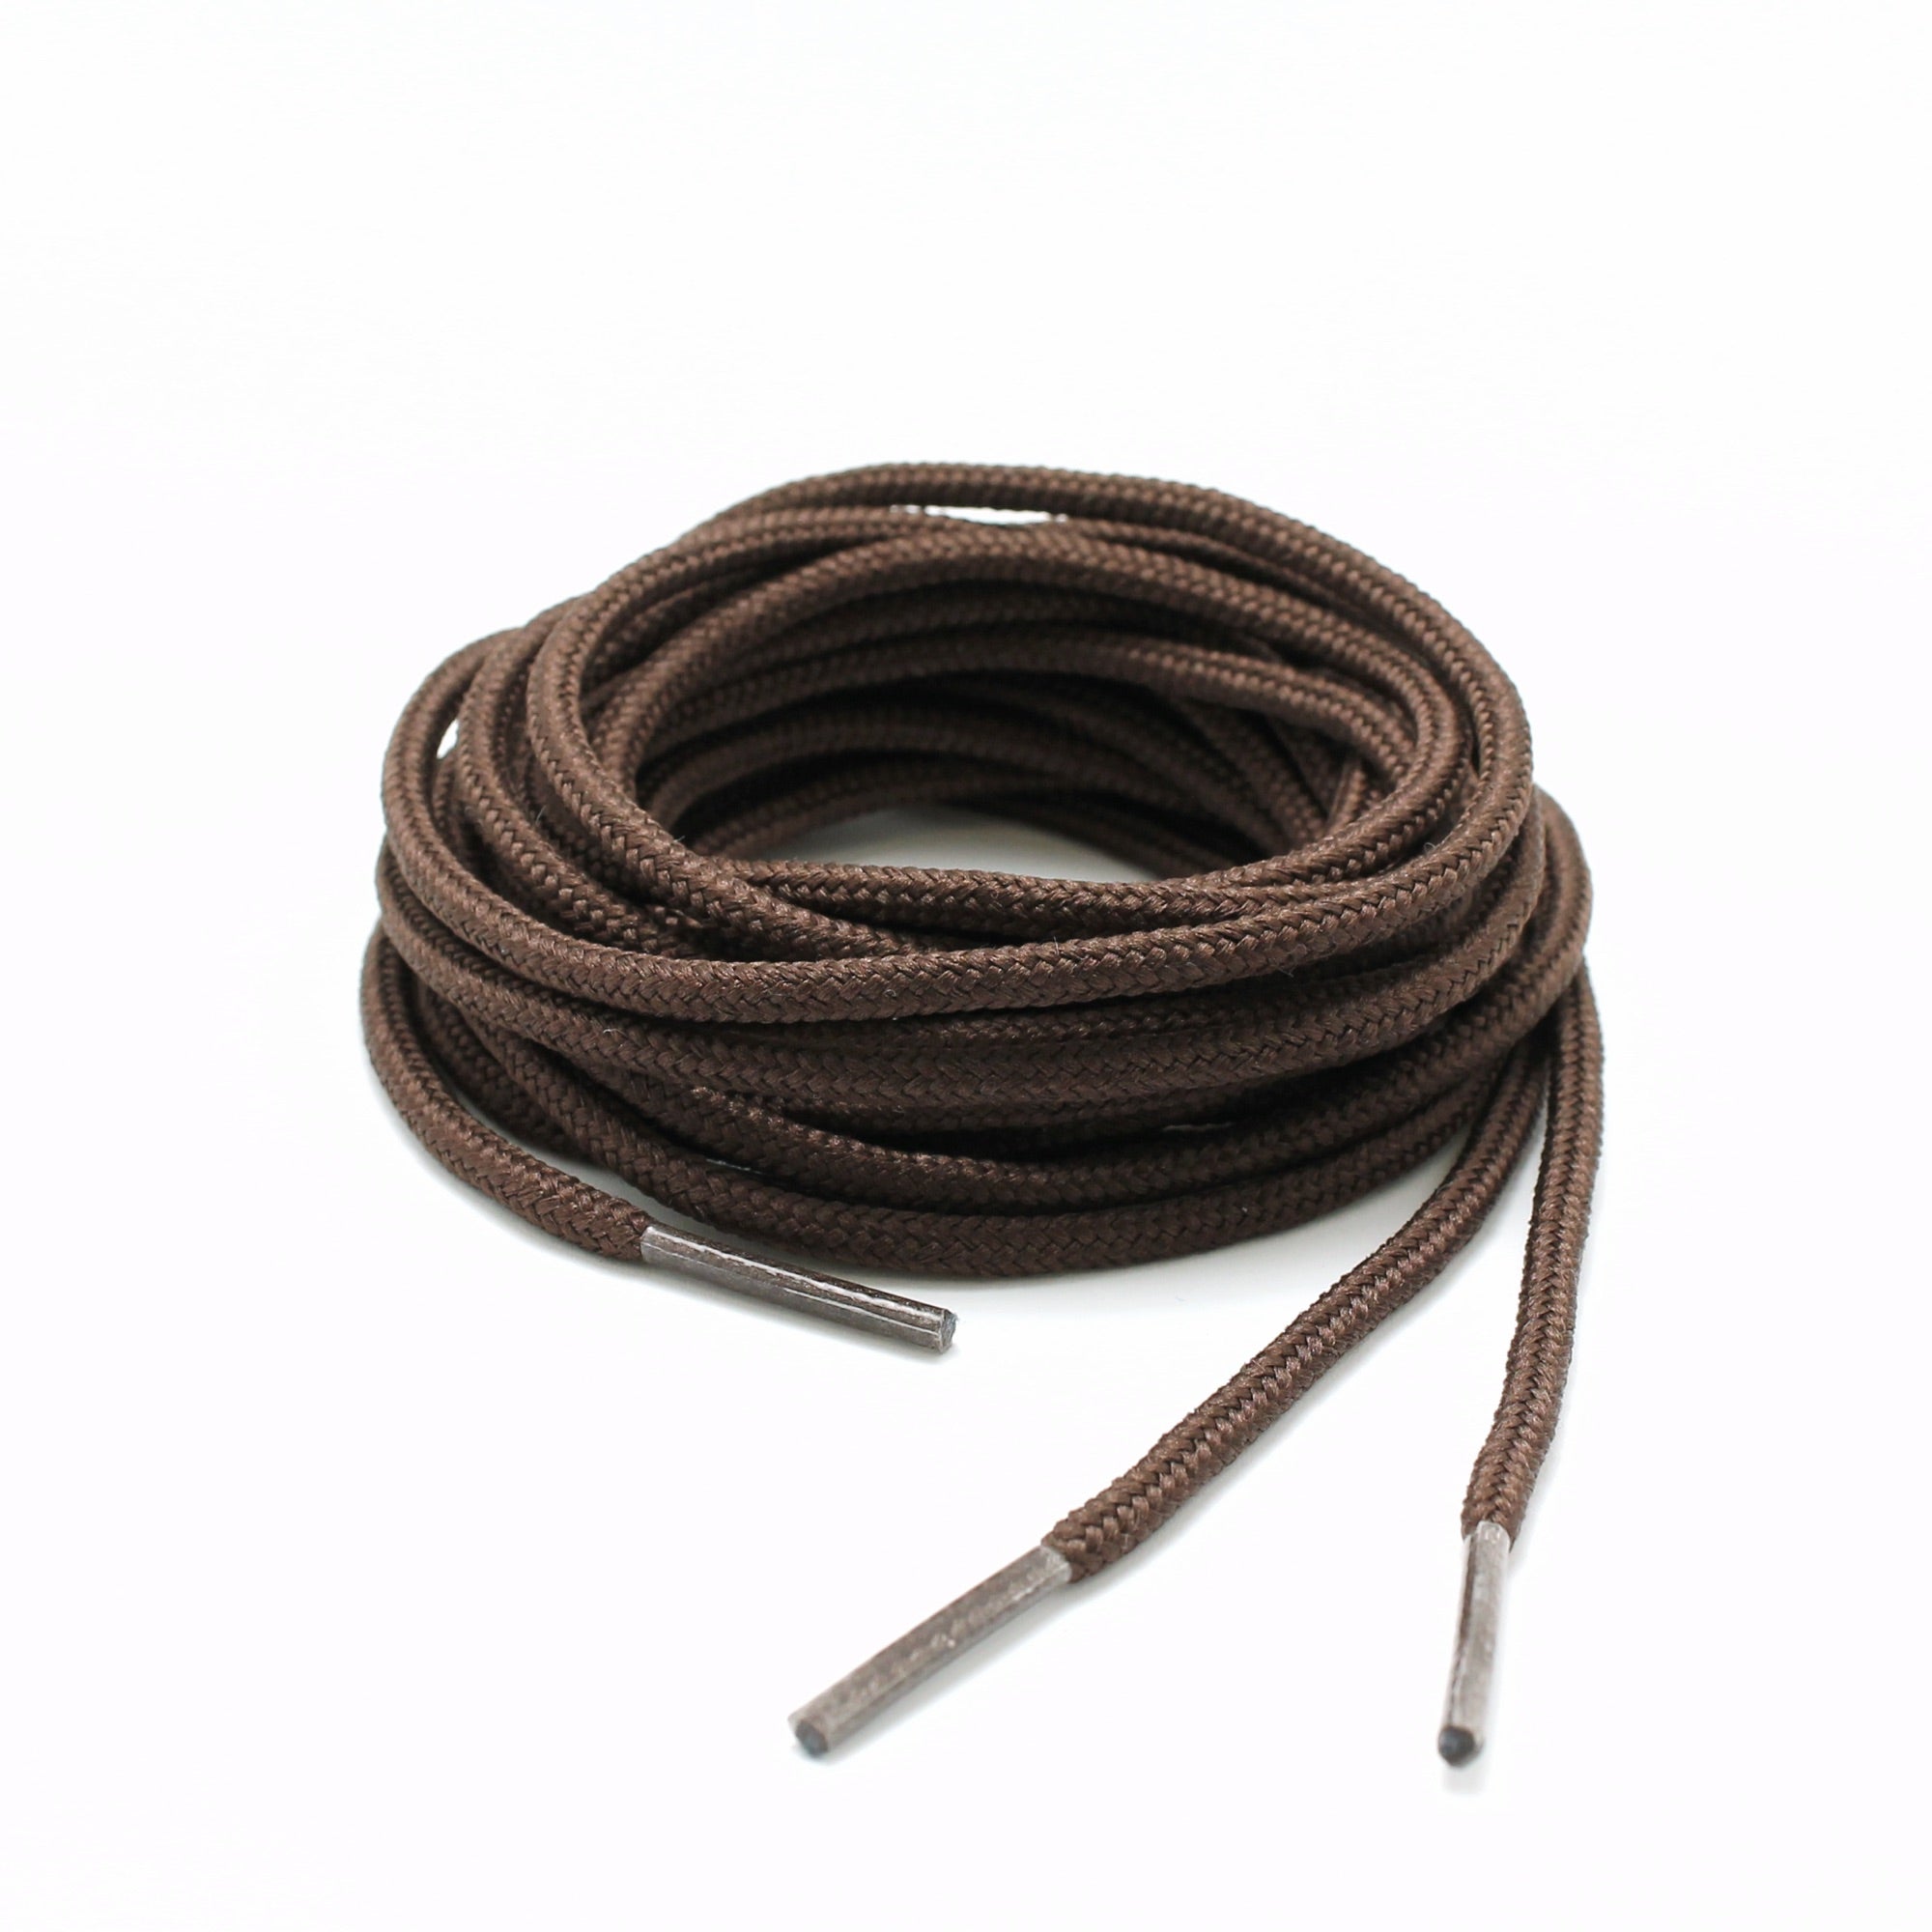 ALTBERG BROWN BOOT LACES